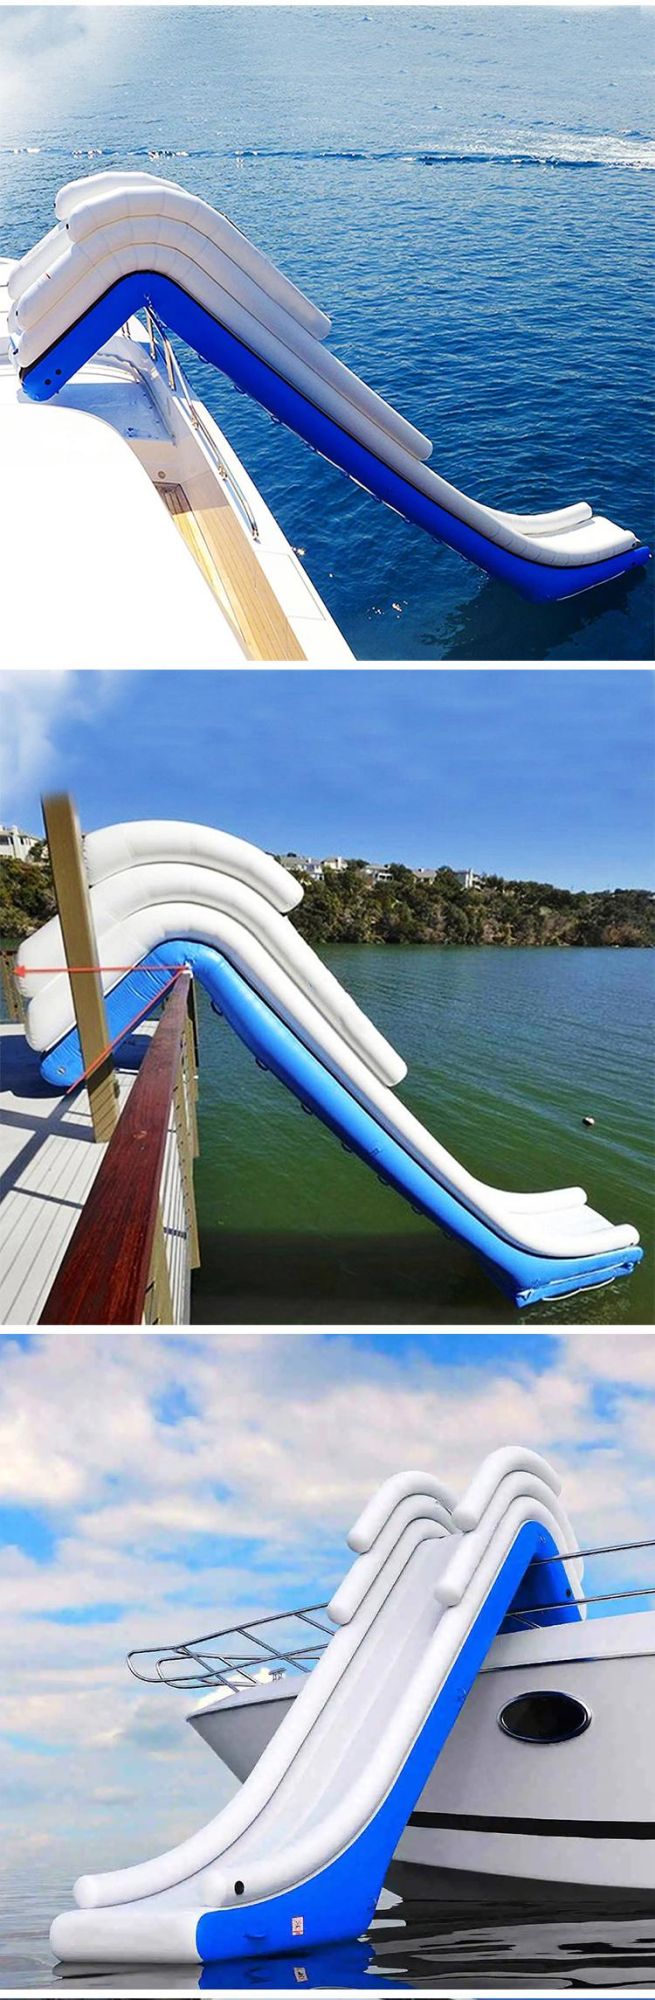 Water Park Funny Sports Boat Dock Slide Inflatable Yacht Floating Water Slide for Adult